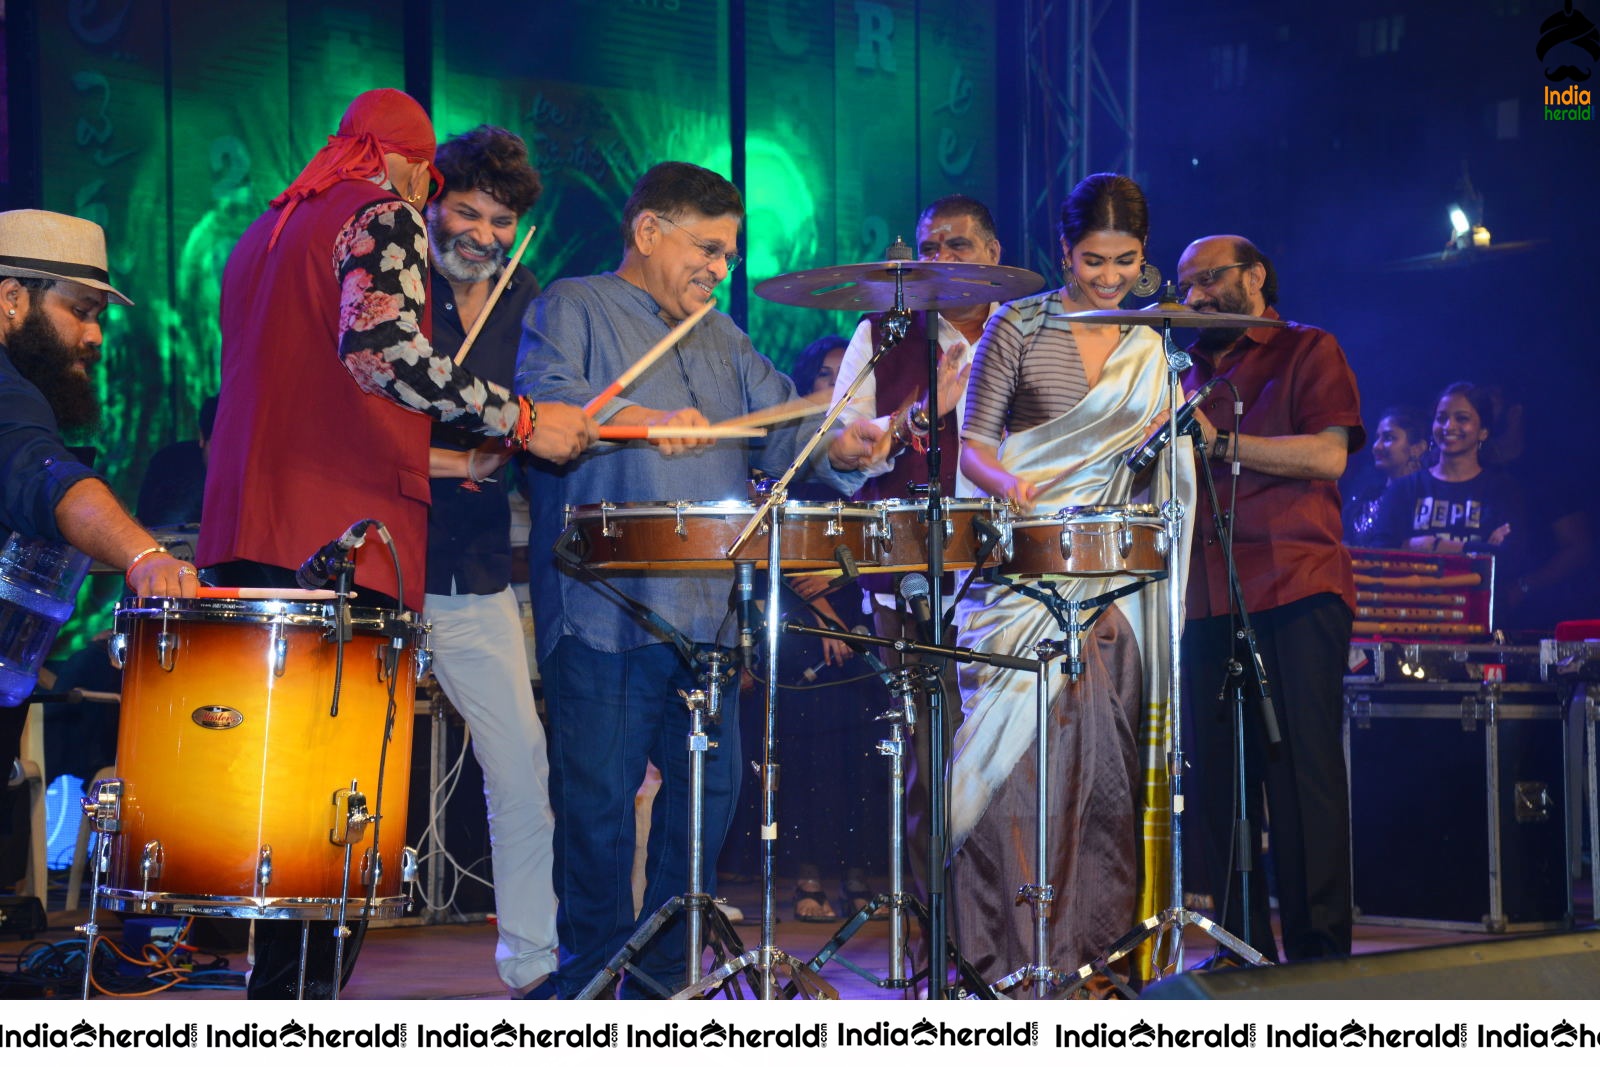 When Pooja Hegde started playing drums along with Sivamani Set 3